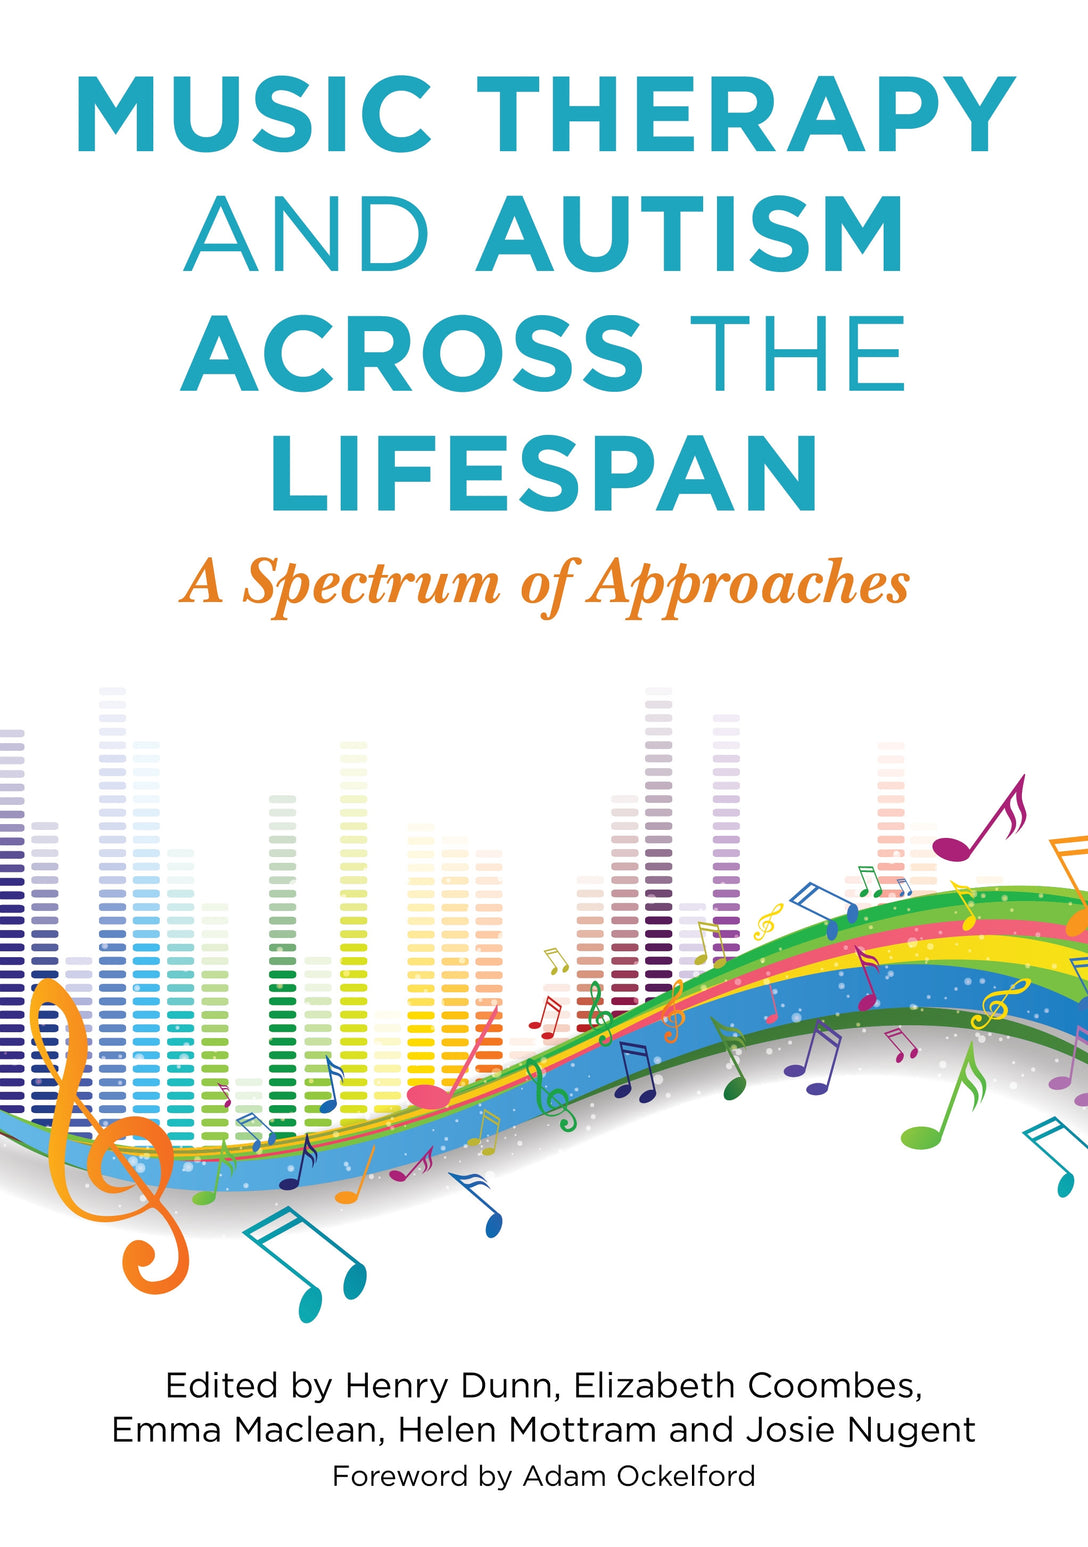 Music Therapy and Autism Across the Lifespan by Henry Dunn, Helen Mottram, Elizabeth Coombes, Emma Maclean, Josie Nugent, No Author Listed, Adam Ockelford